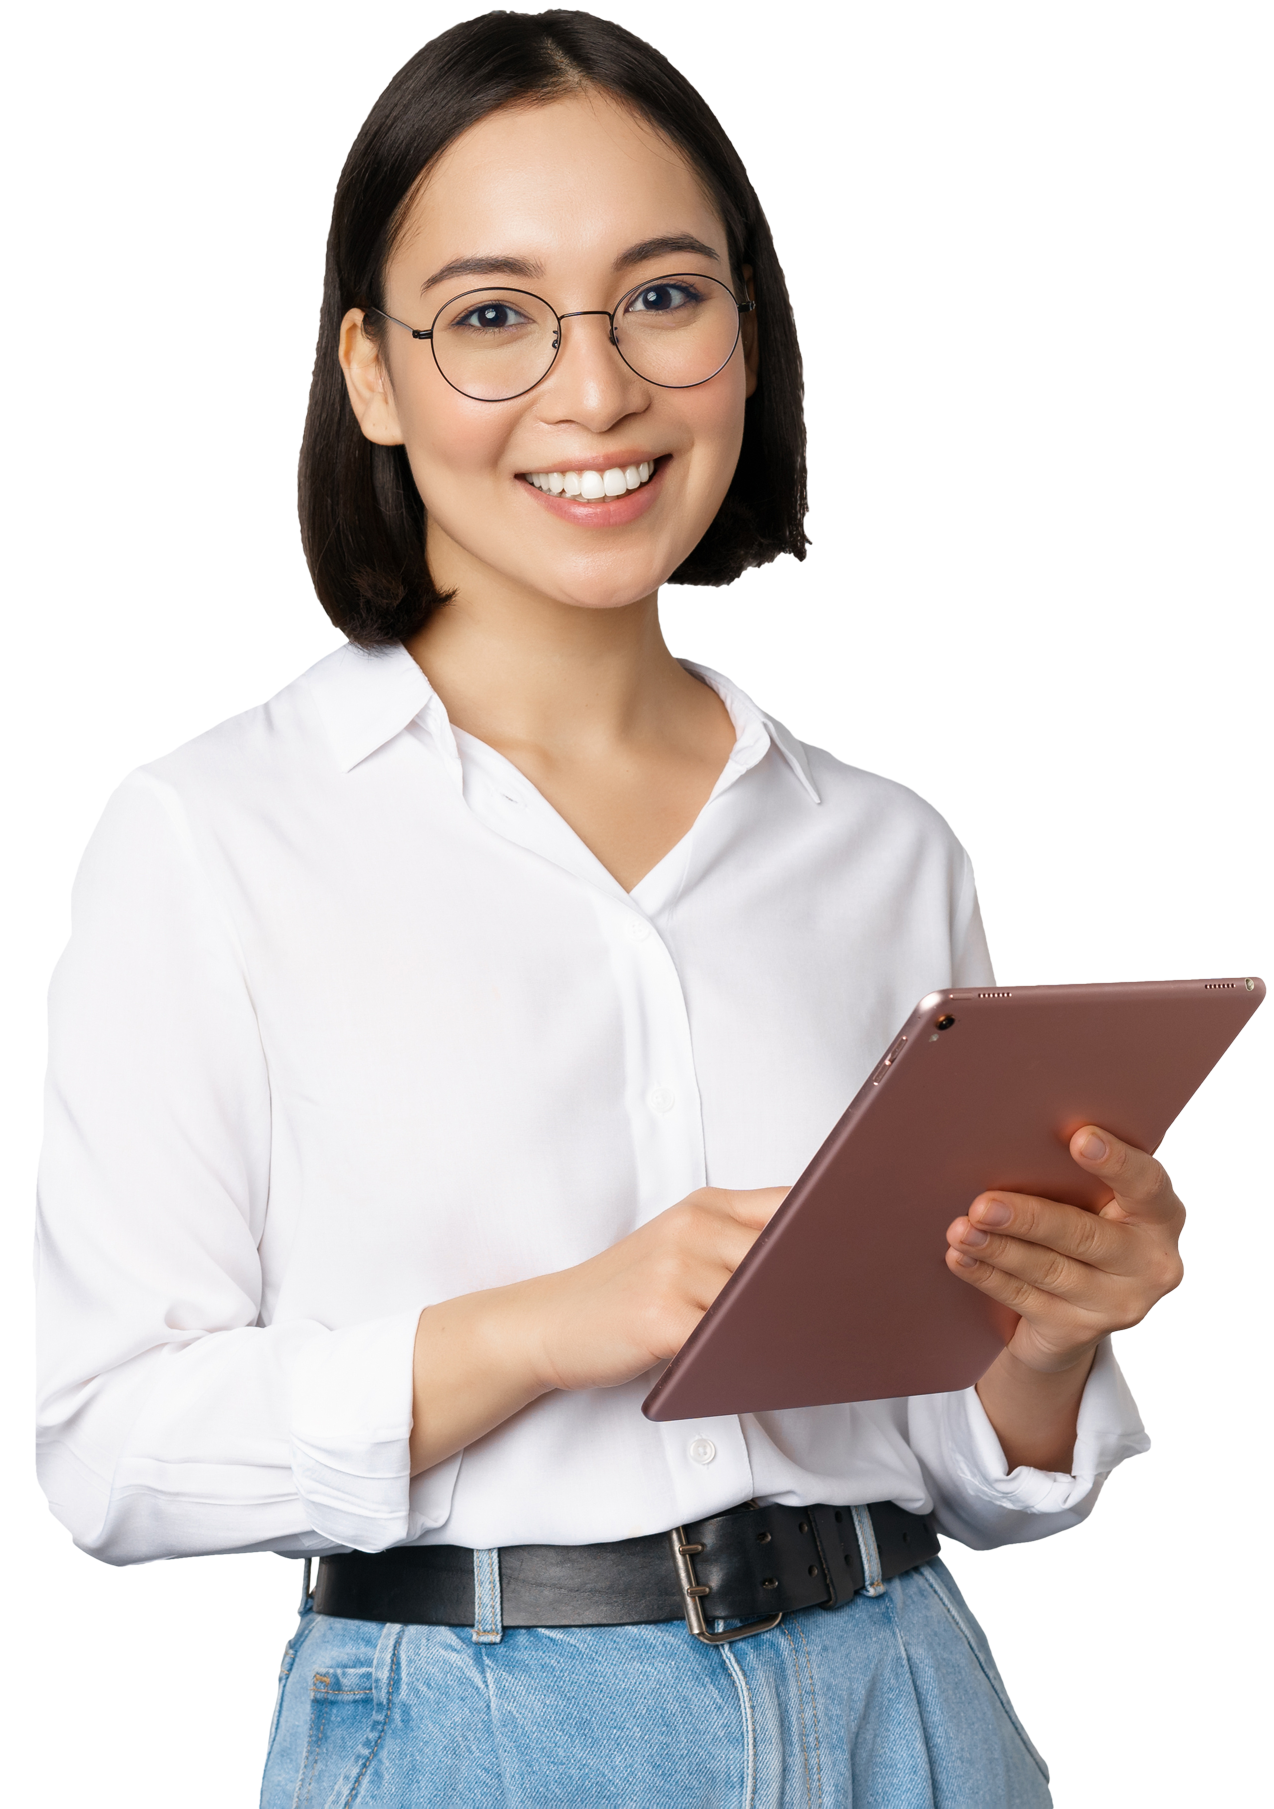 Woman with glasses holding clipboard